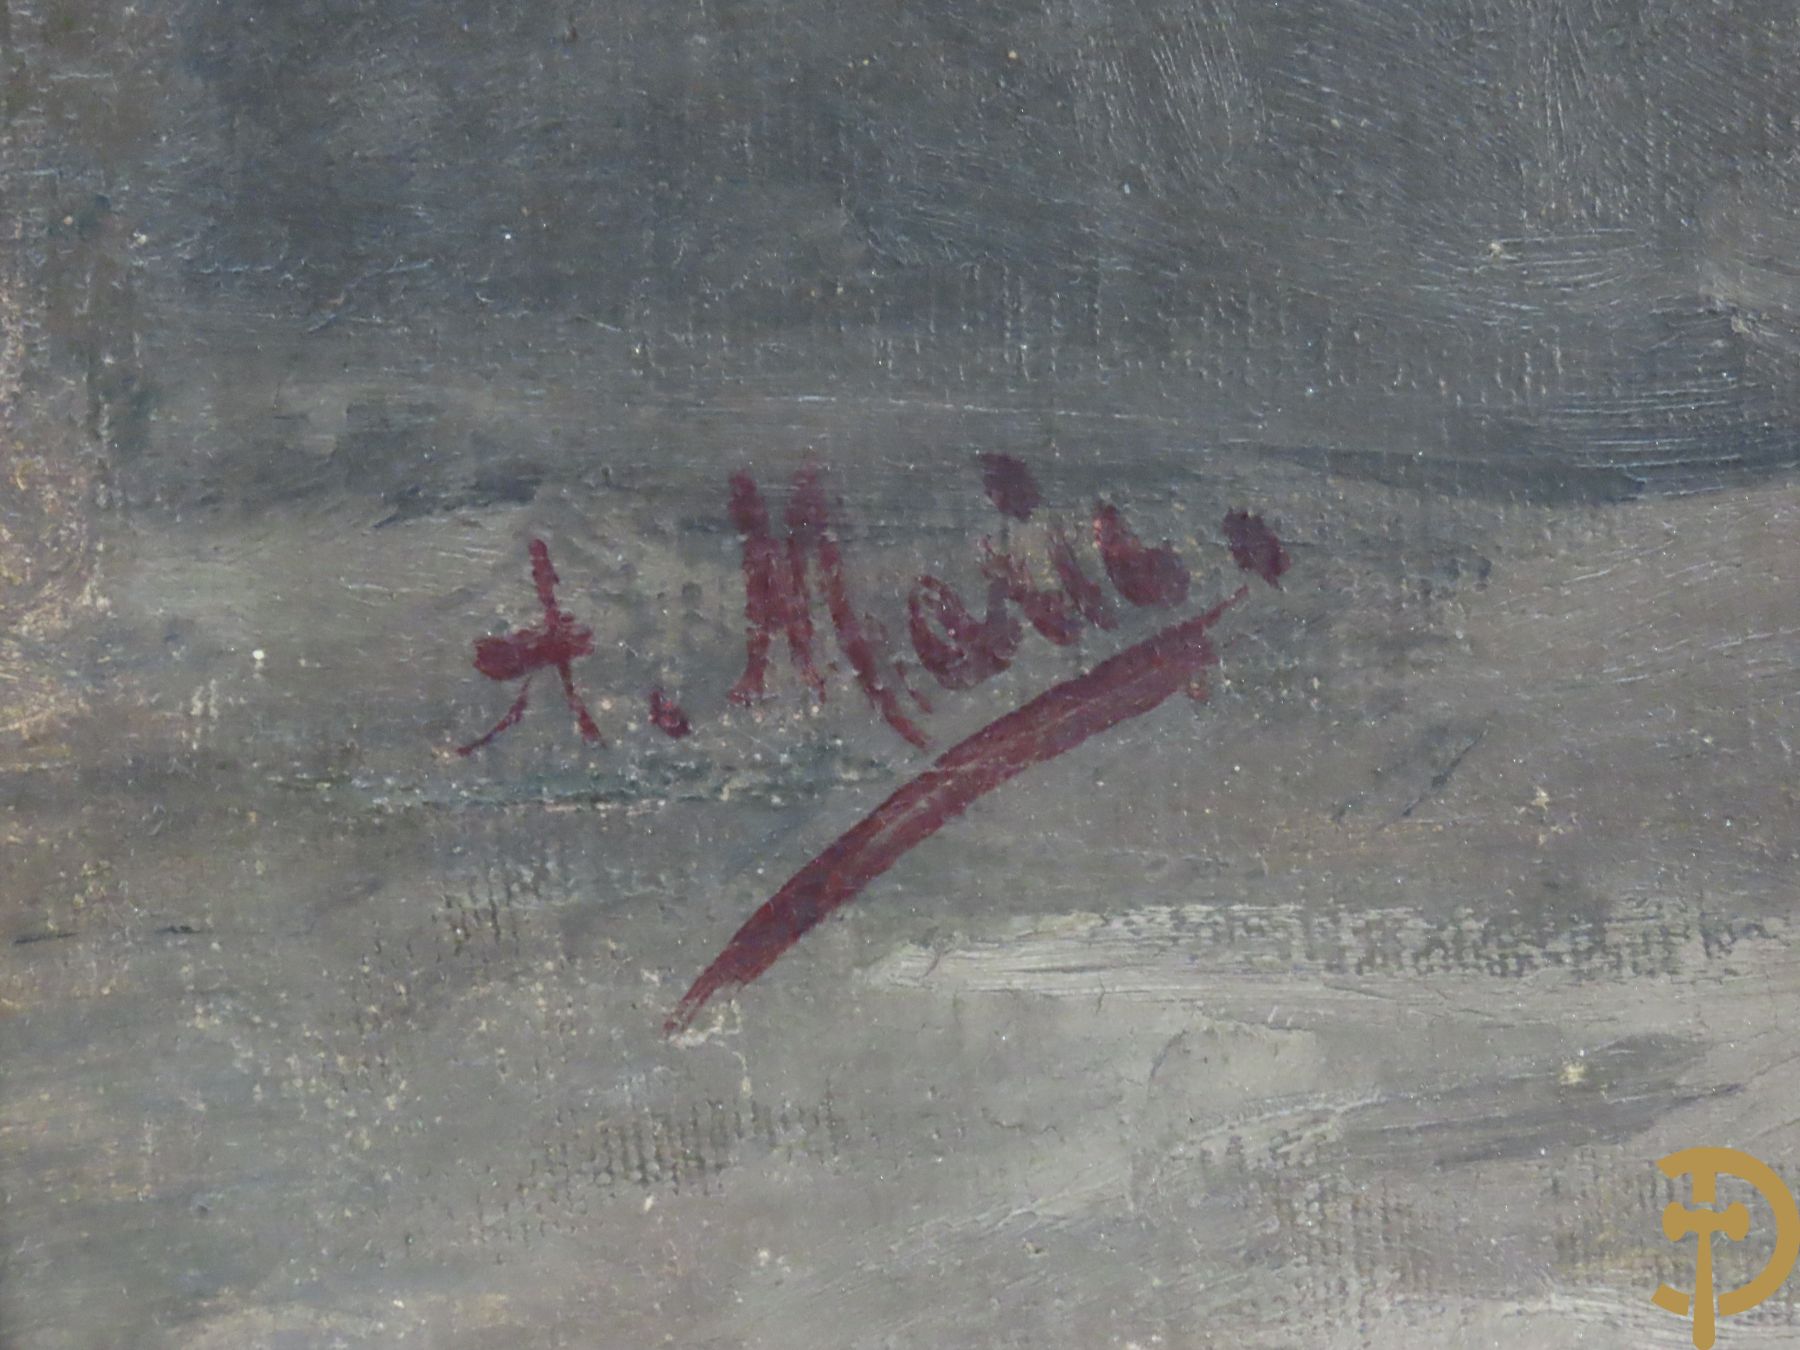 MARIE A. get. 19 Aout 1889 